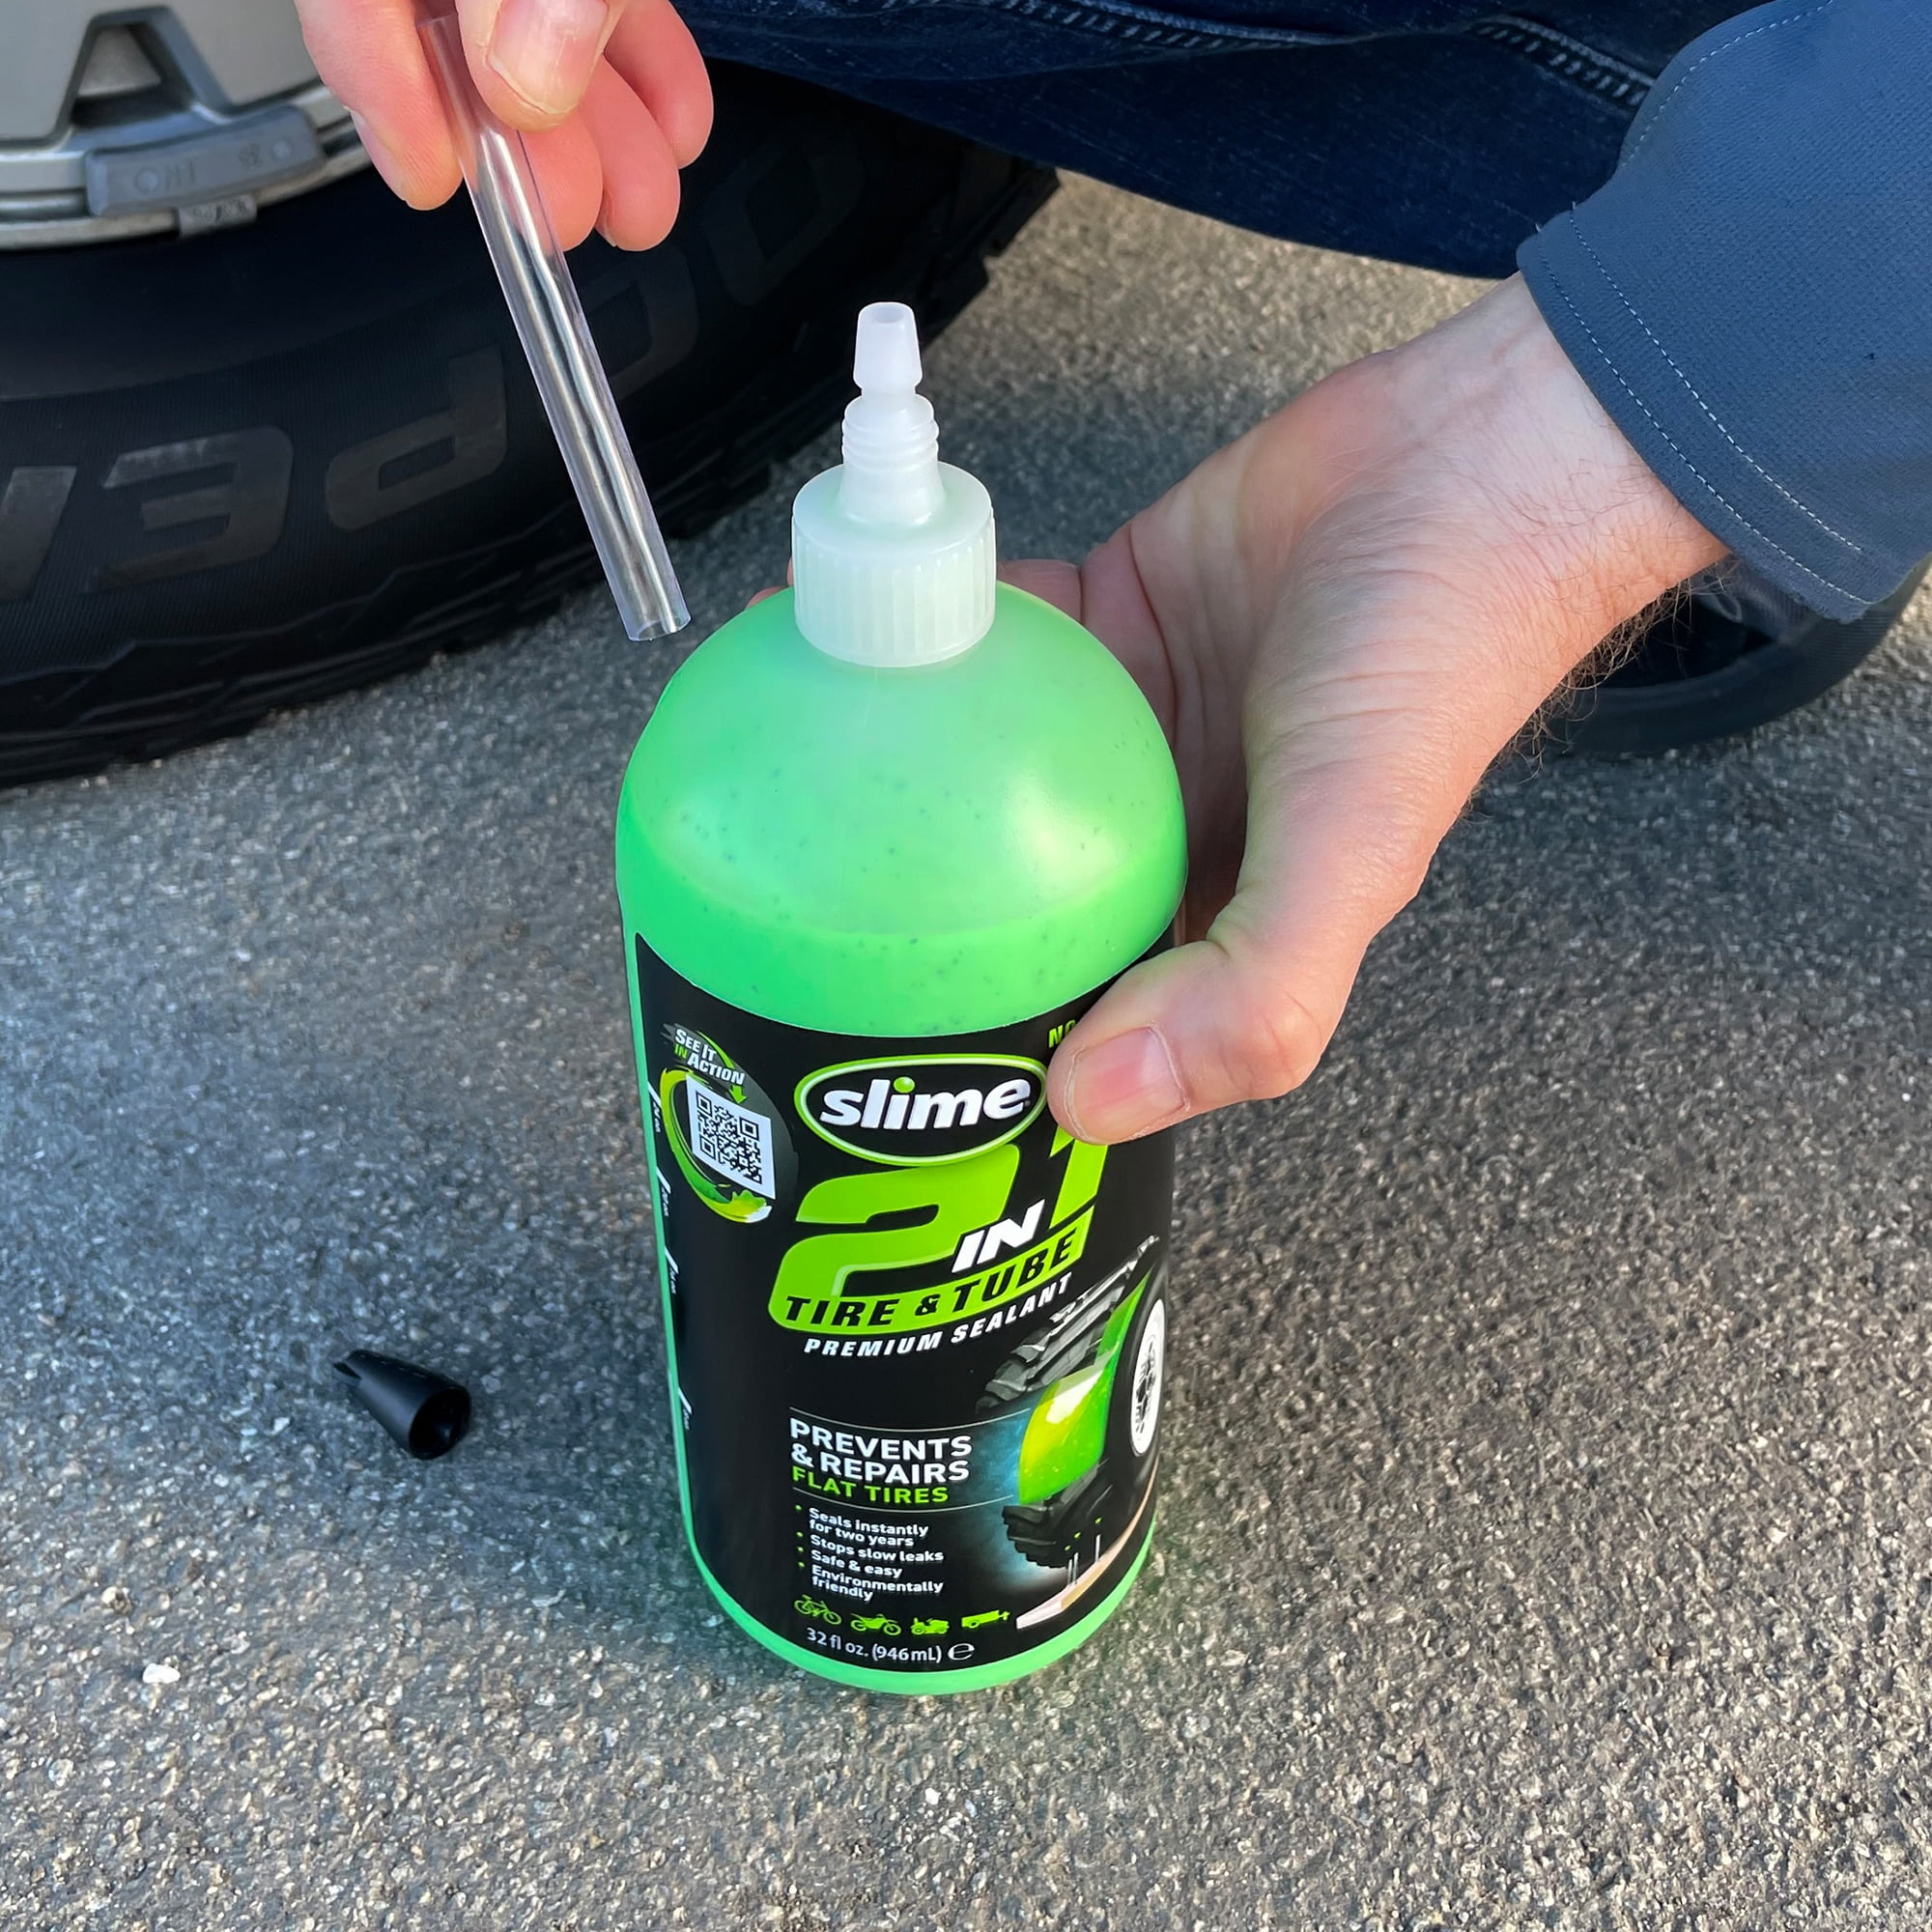 Slime 2-in-1 Tire and Tube Sealant, 1 Gallon, 10195 